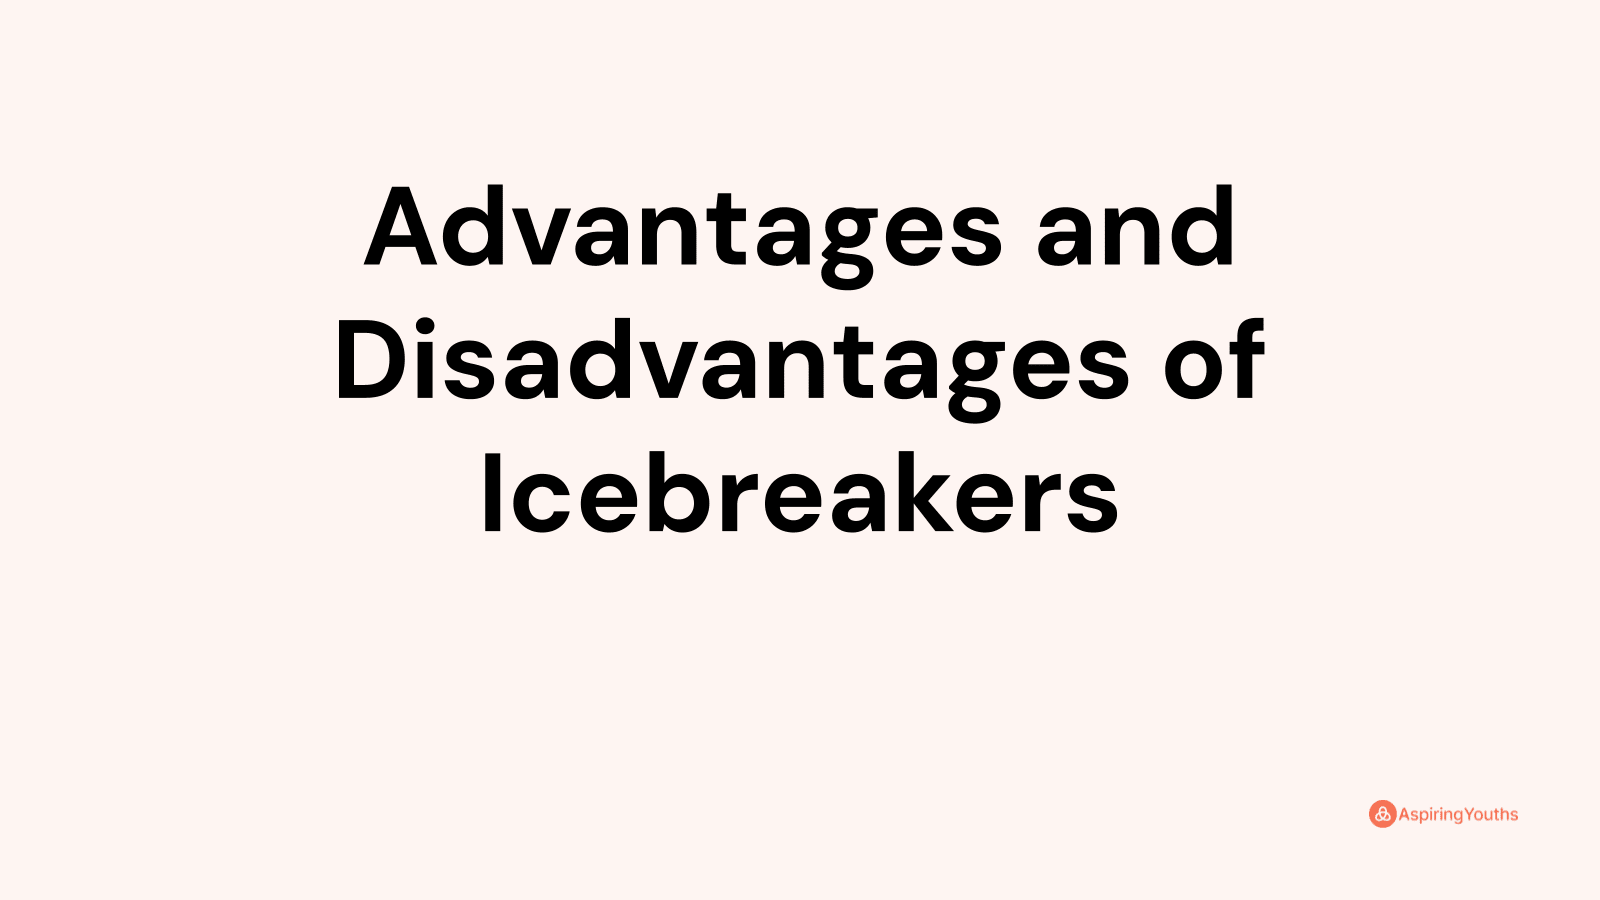 Advantages and Disadvantages of Icebreakers